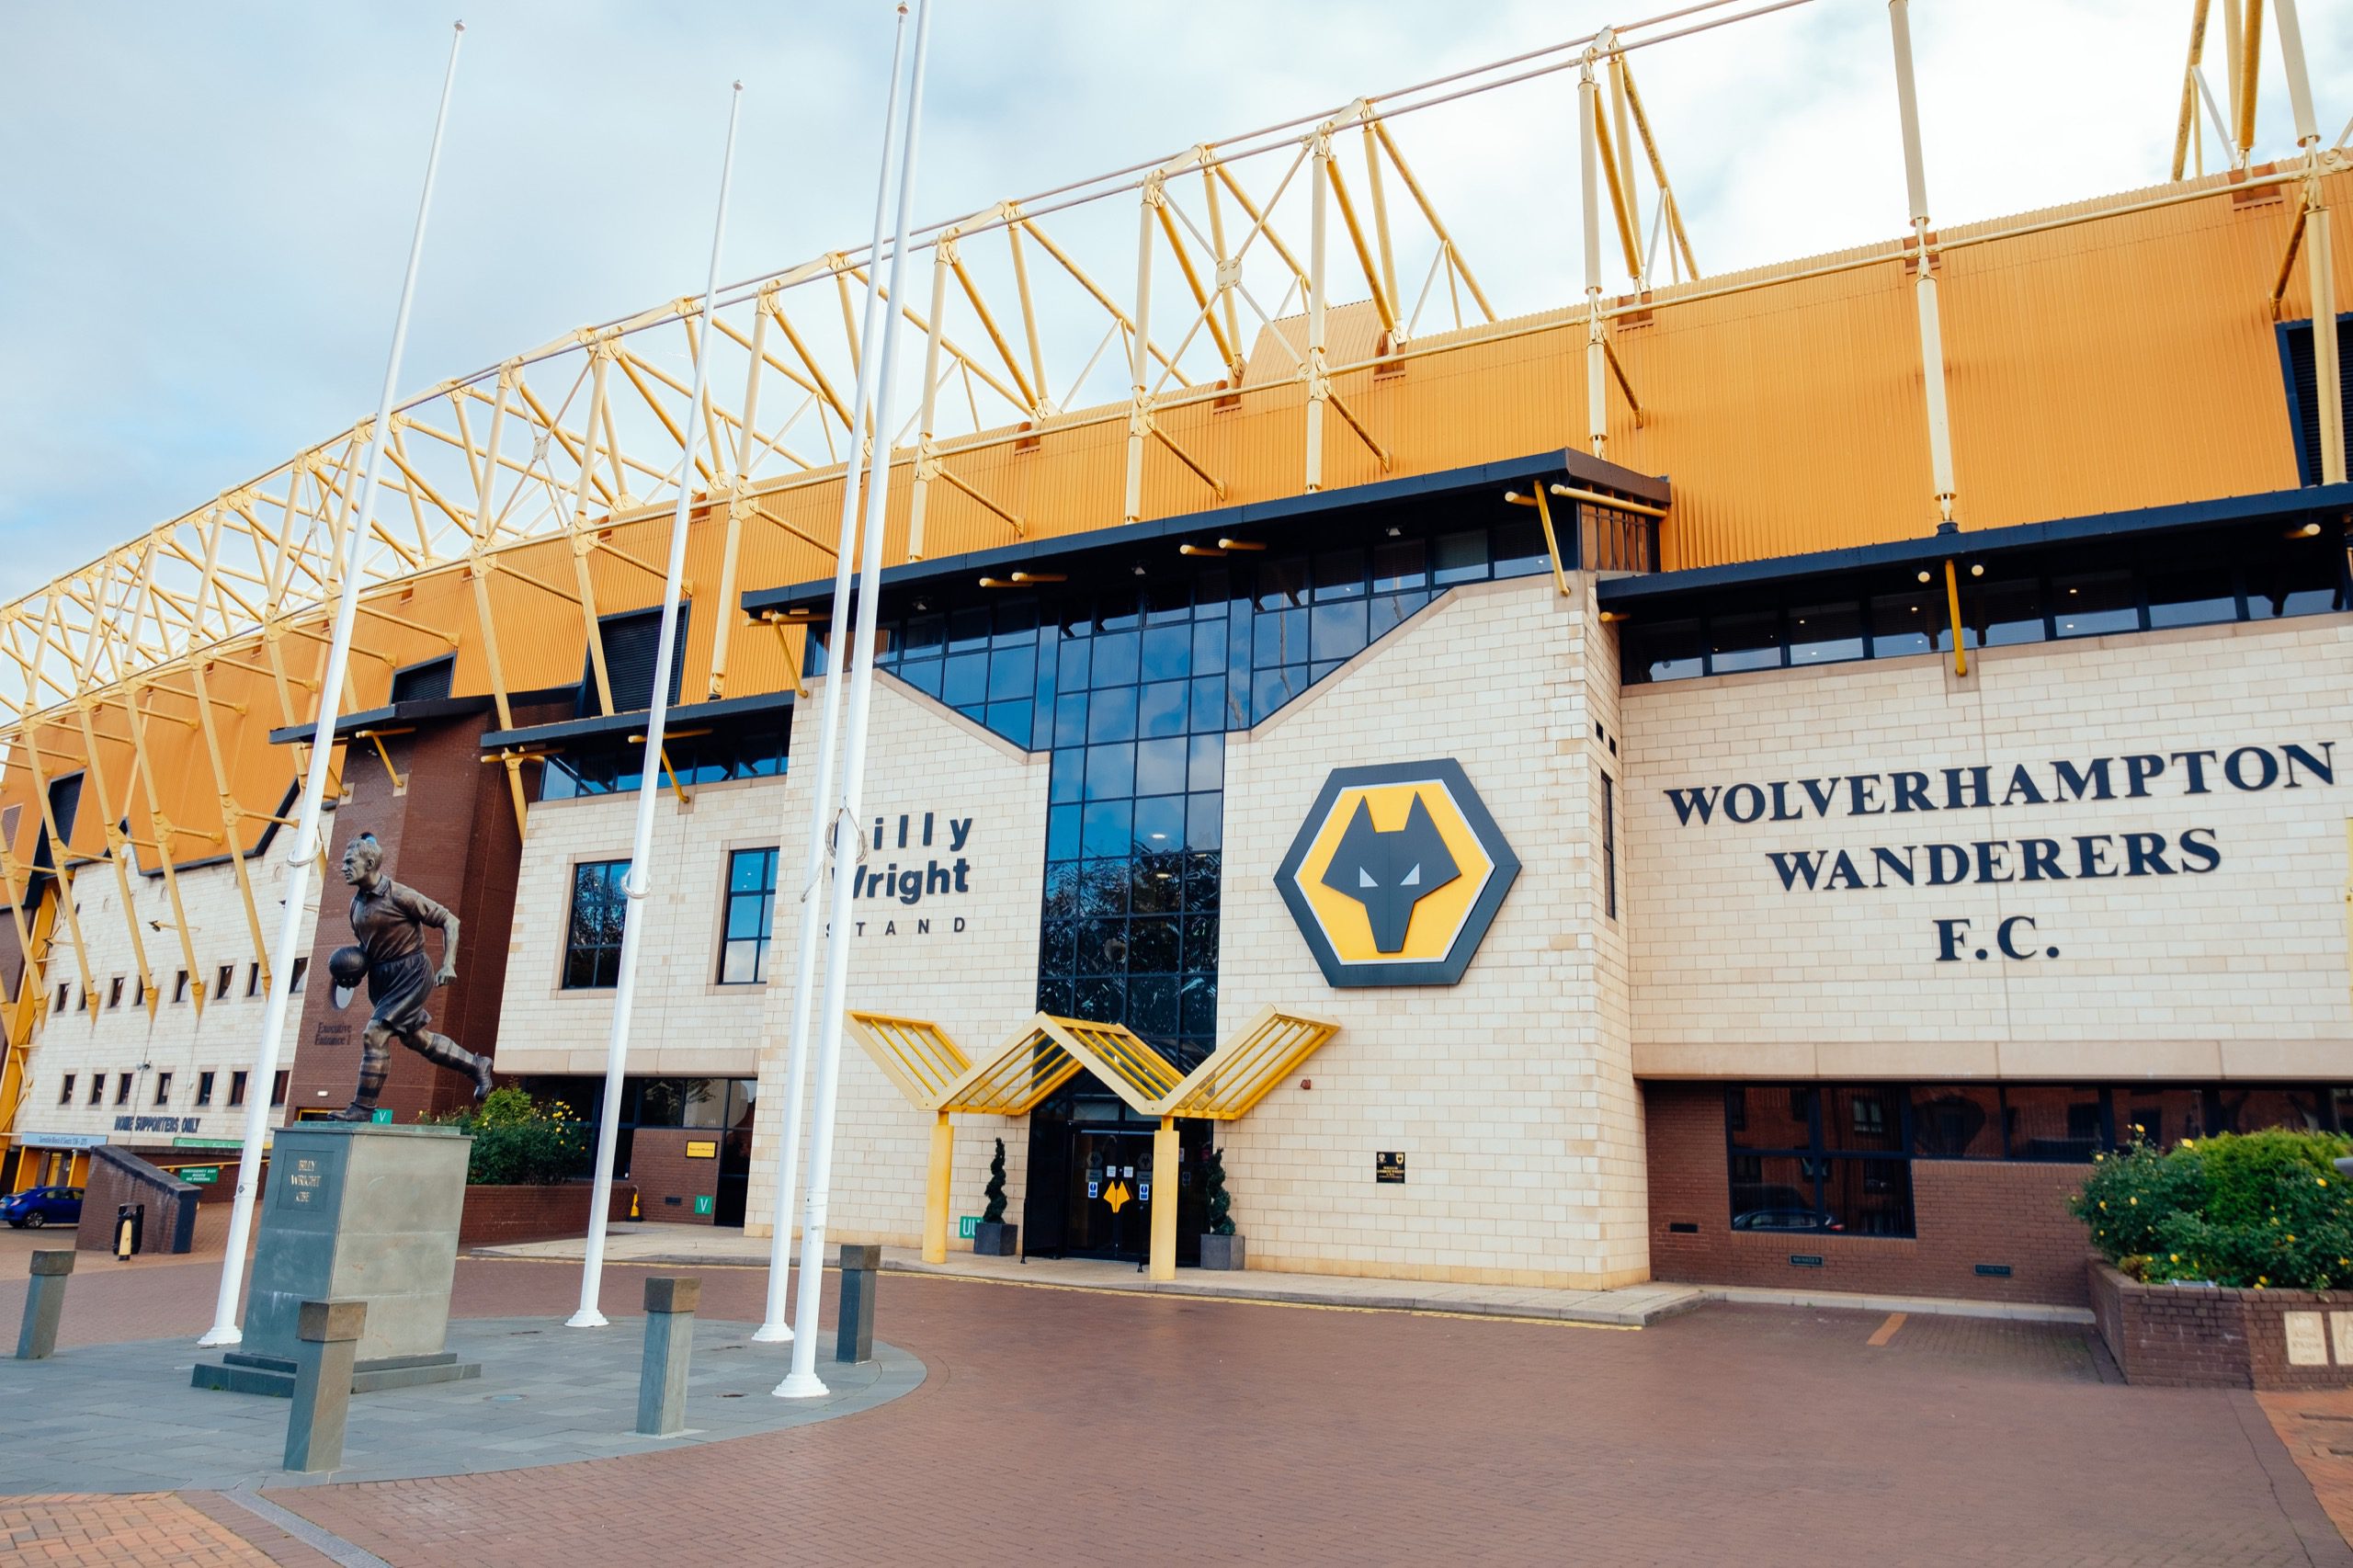 Wolverhampton Wanderers Billy Wright Stand.